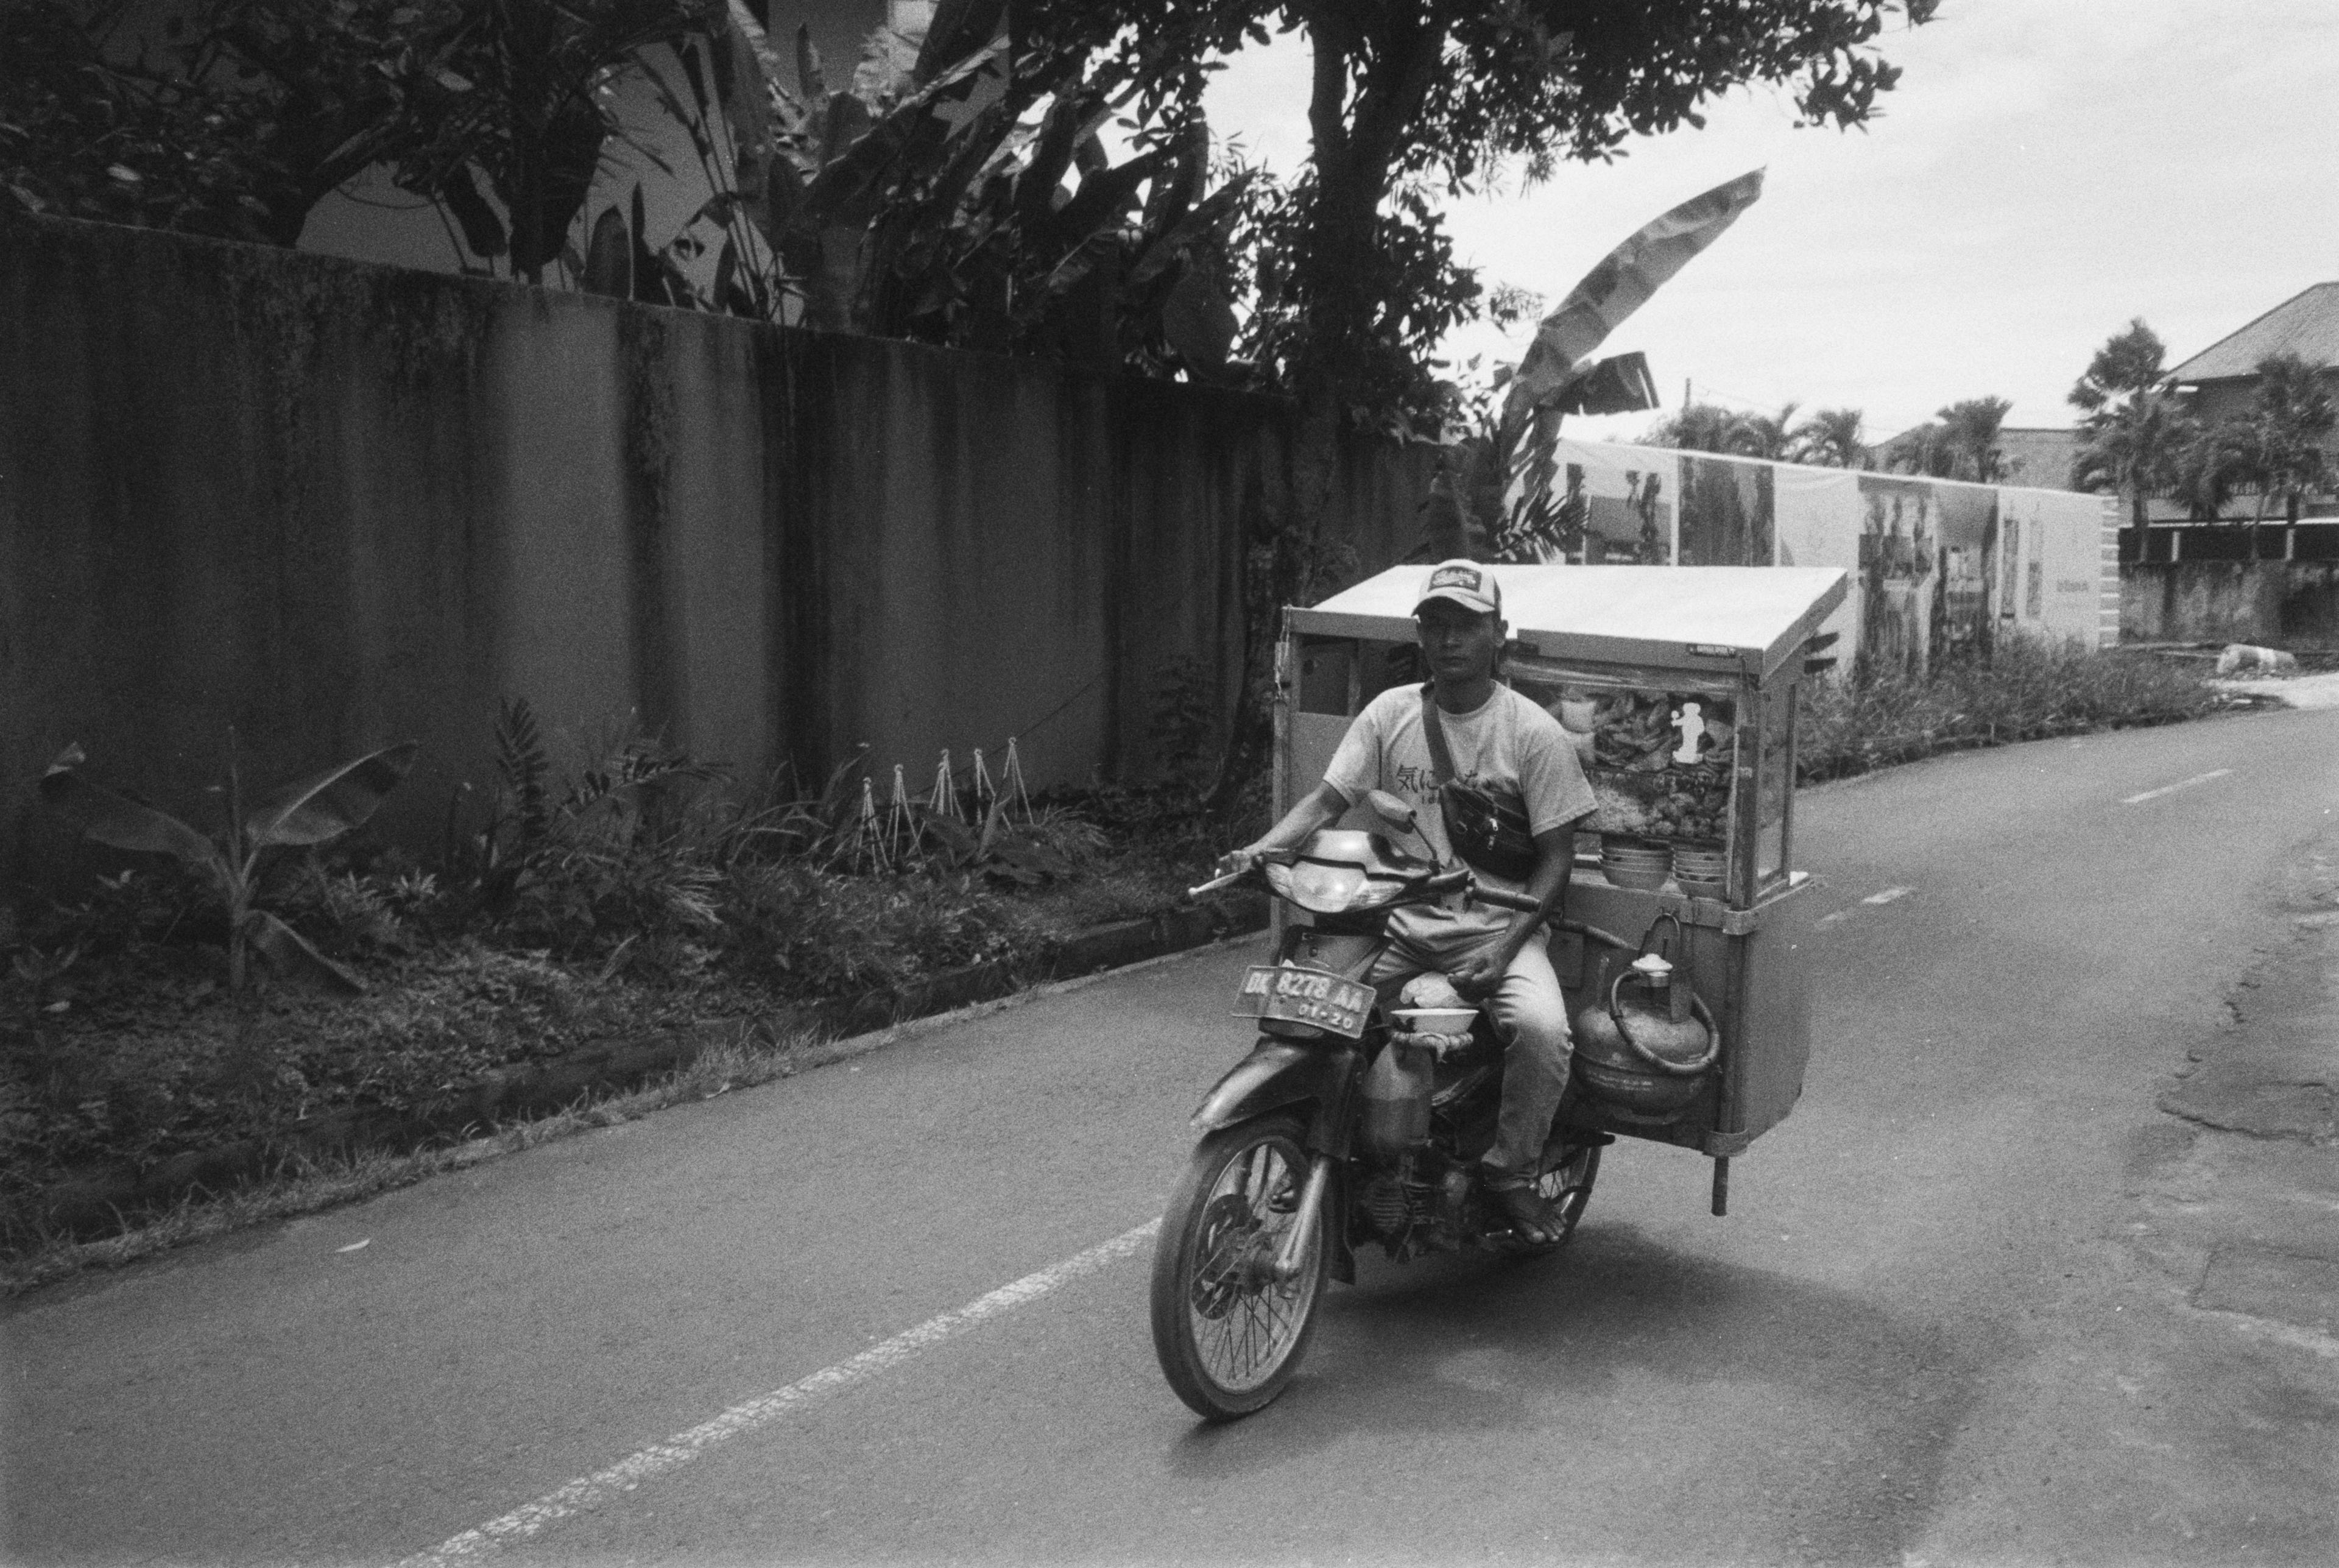 Black and white picture of a man driving a motorcycle carrying a food stand in the passenger's seat